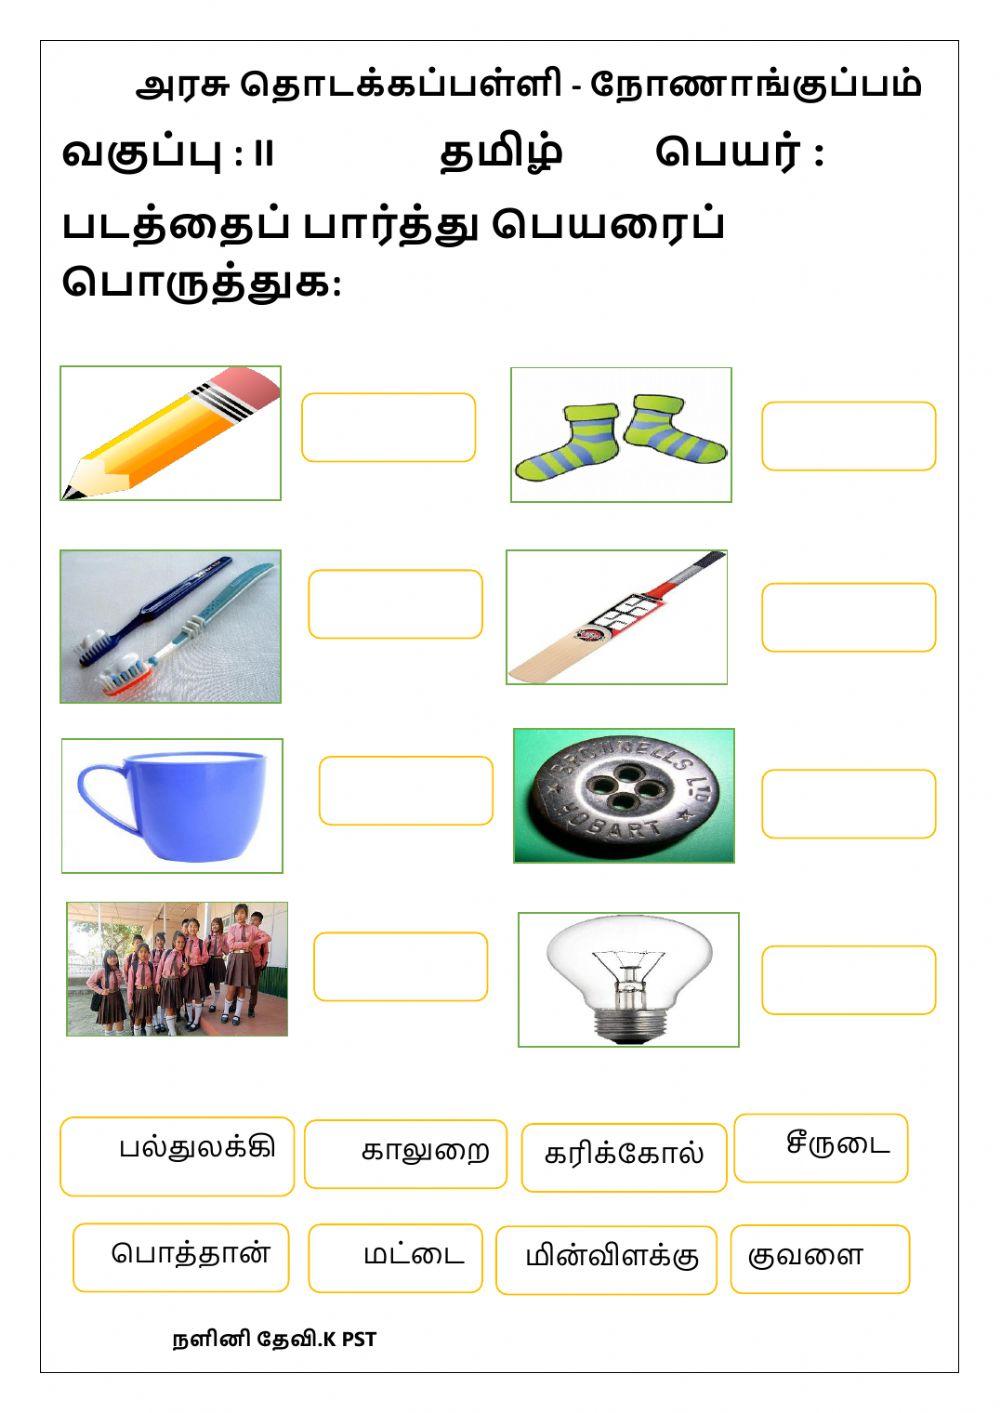 Drag and drop tamil words